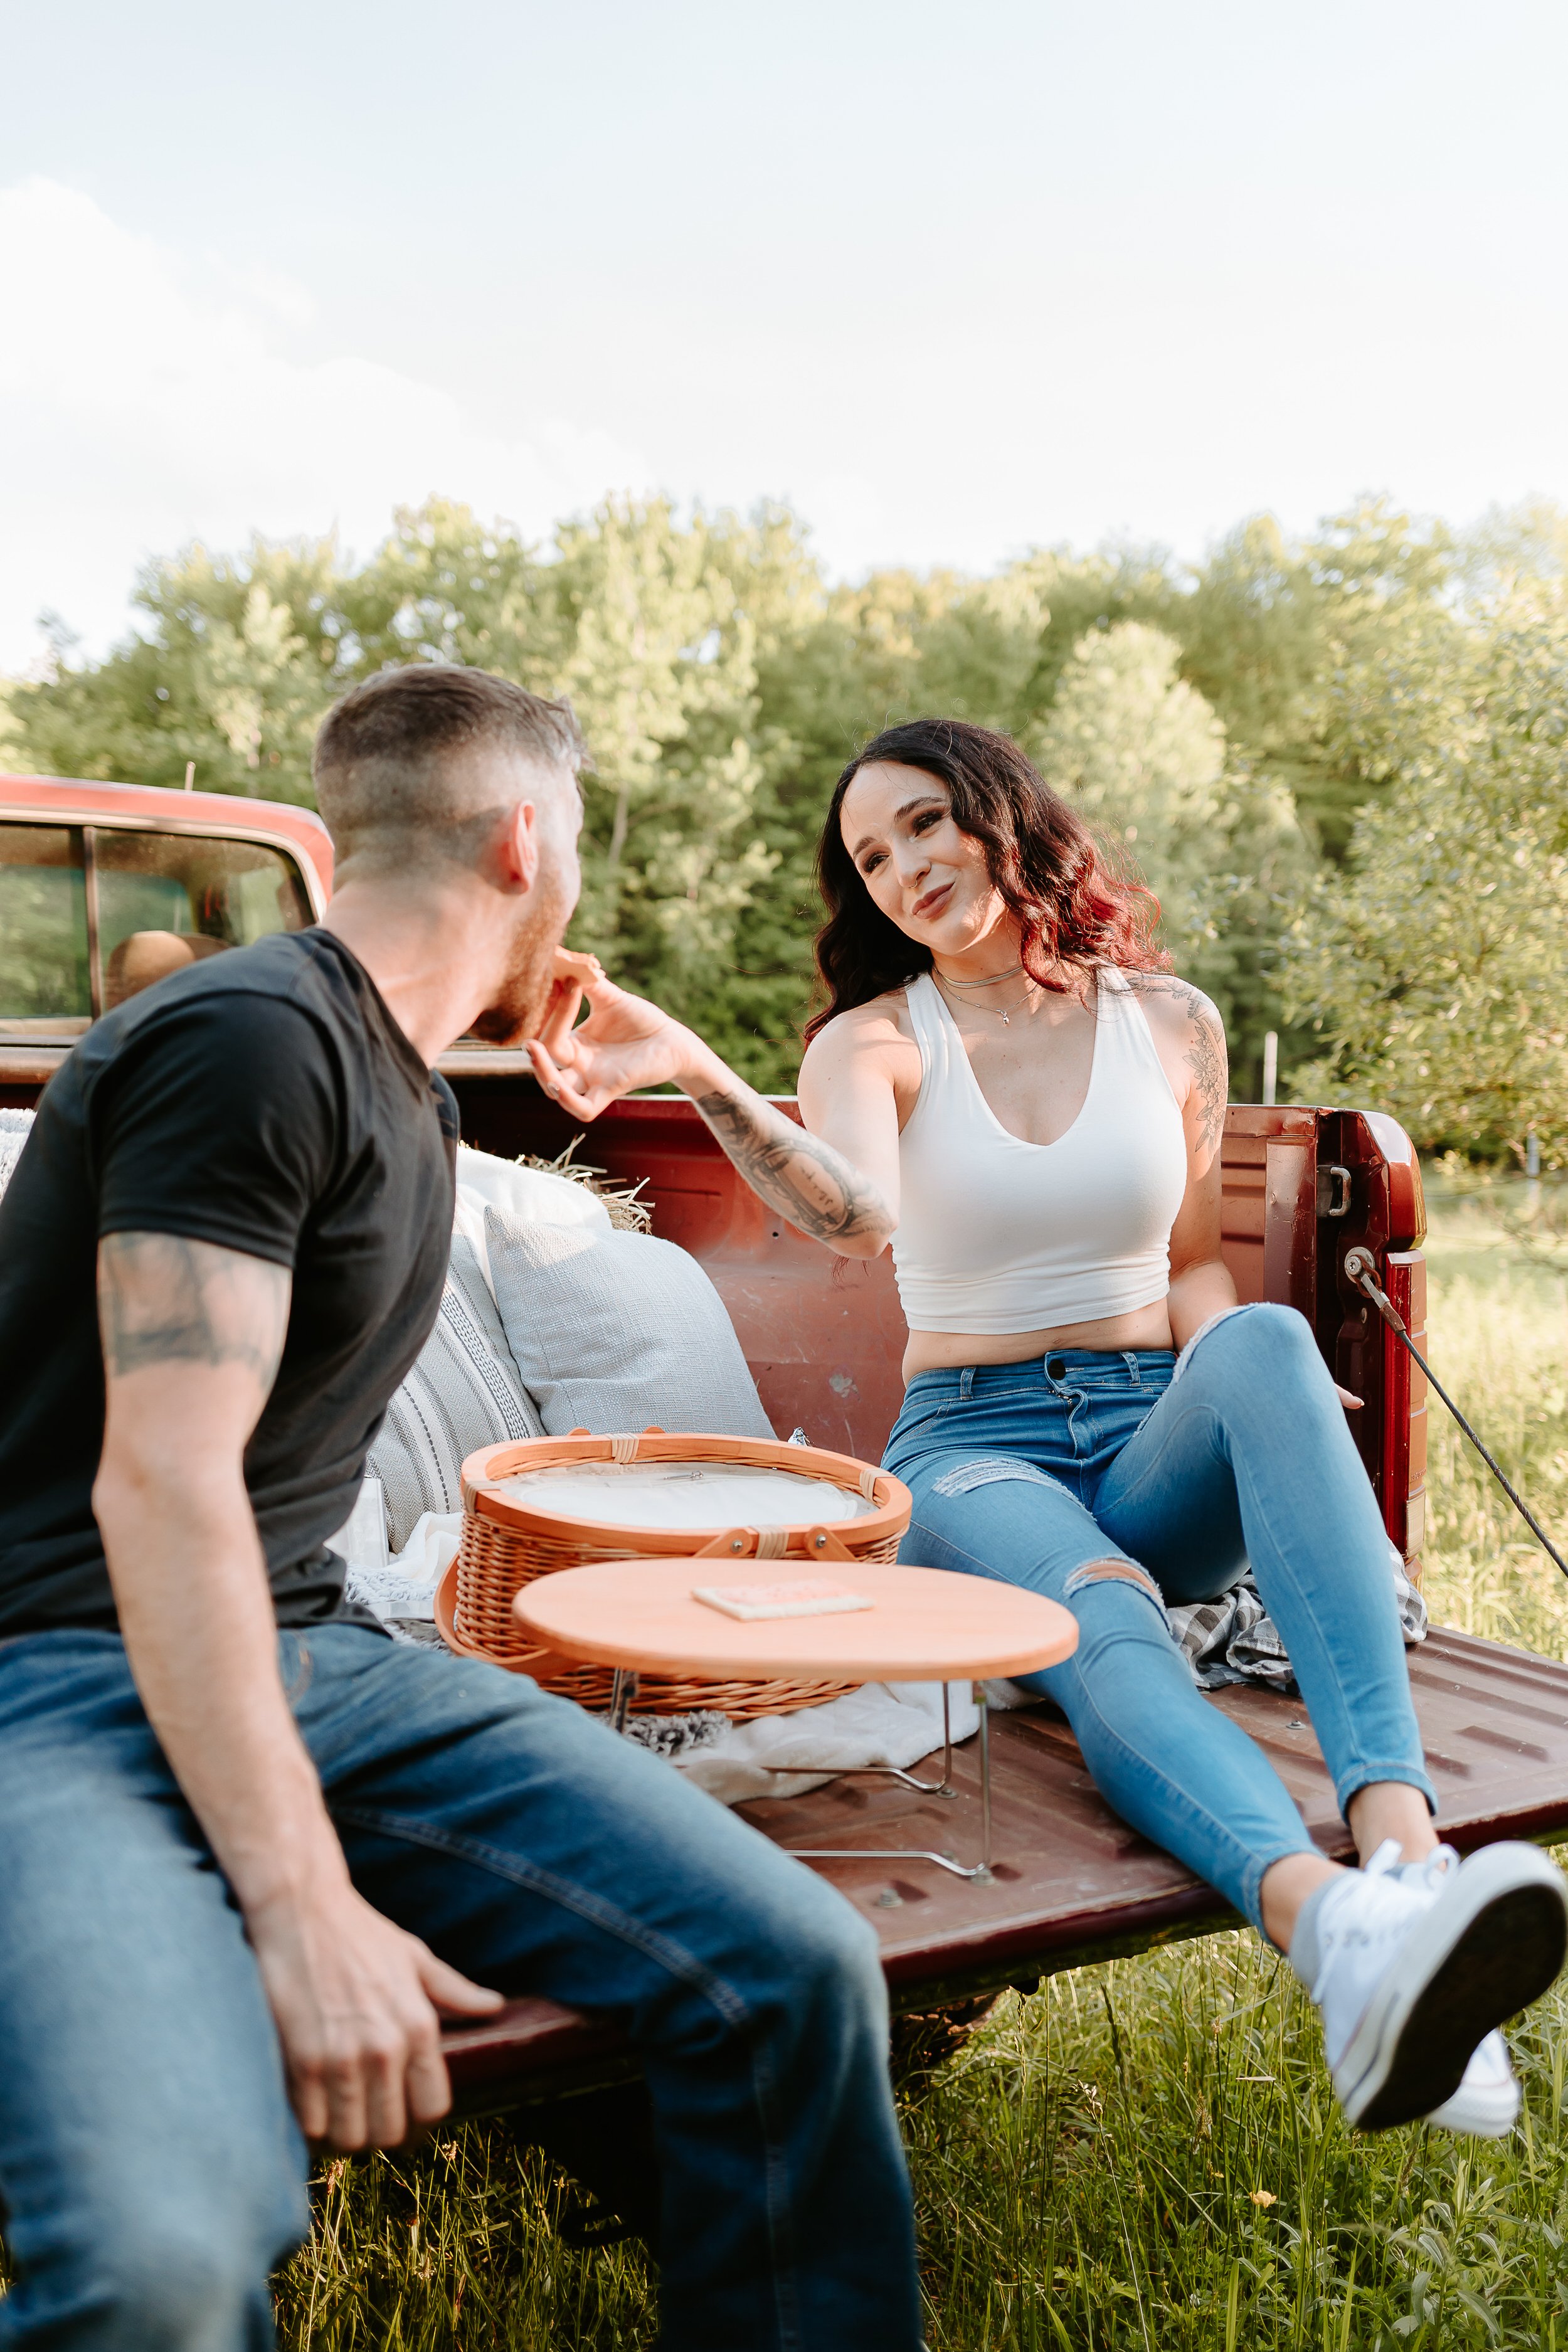 Couple shares a bite to eat in the bed of a red truck.